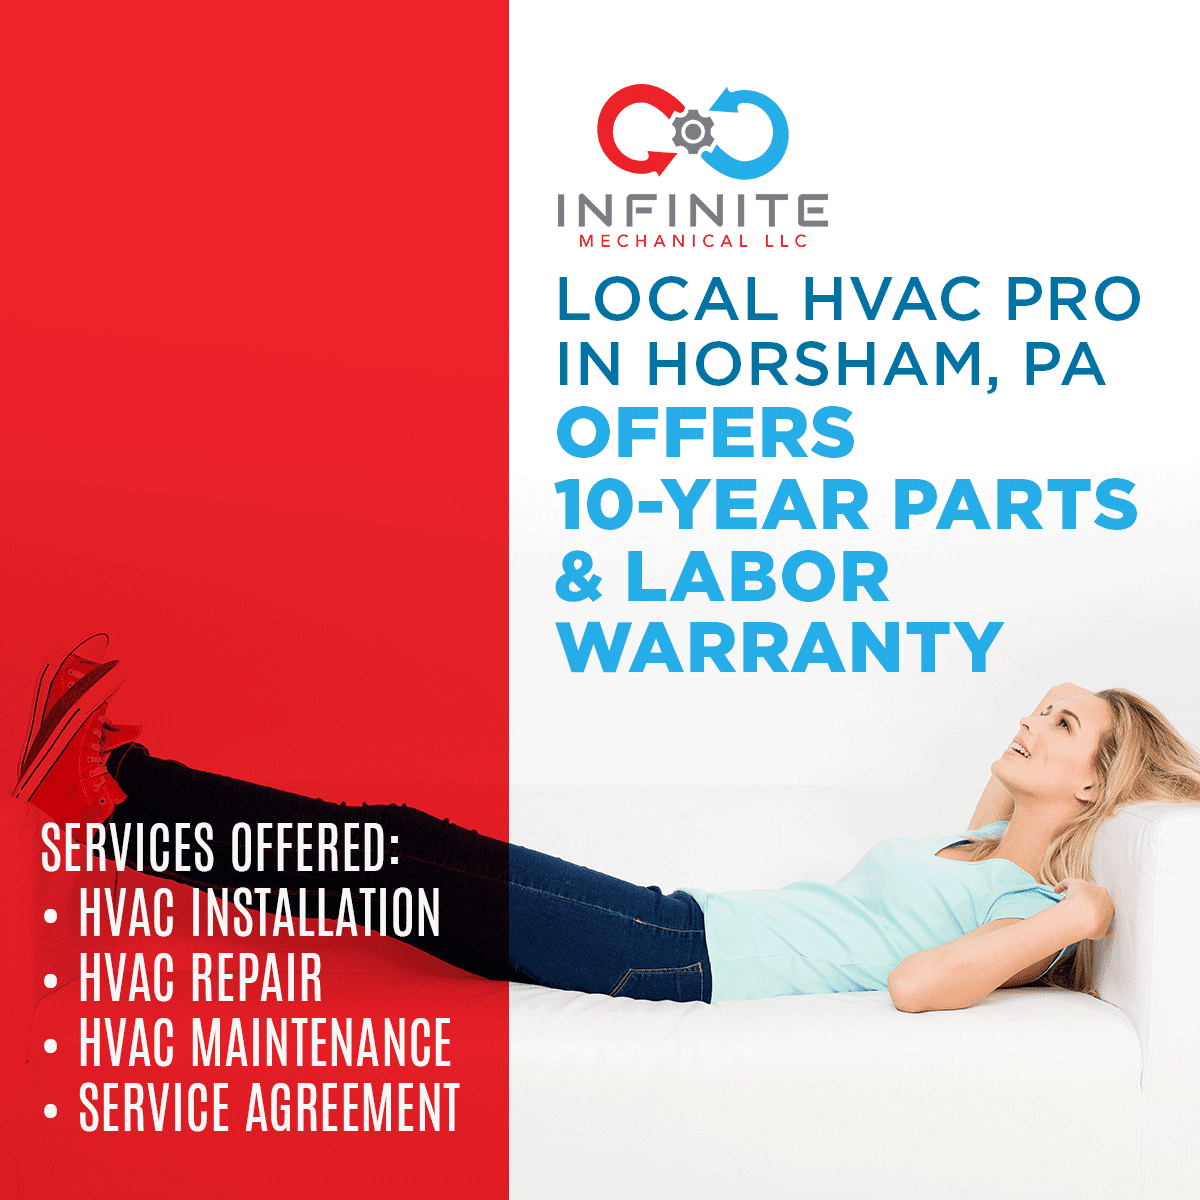 Local HVAC Pro in Horsham, PA Offers 10-Year Parts & Labor Warranty